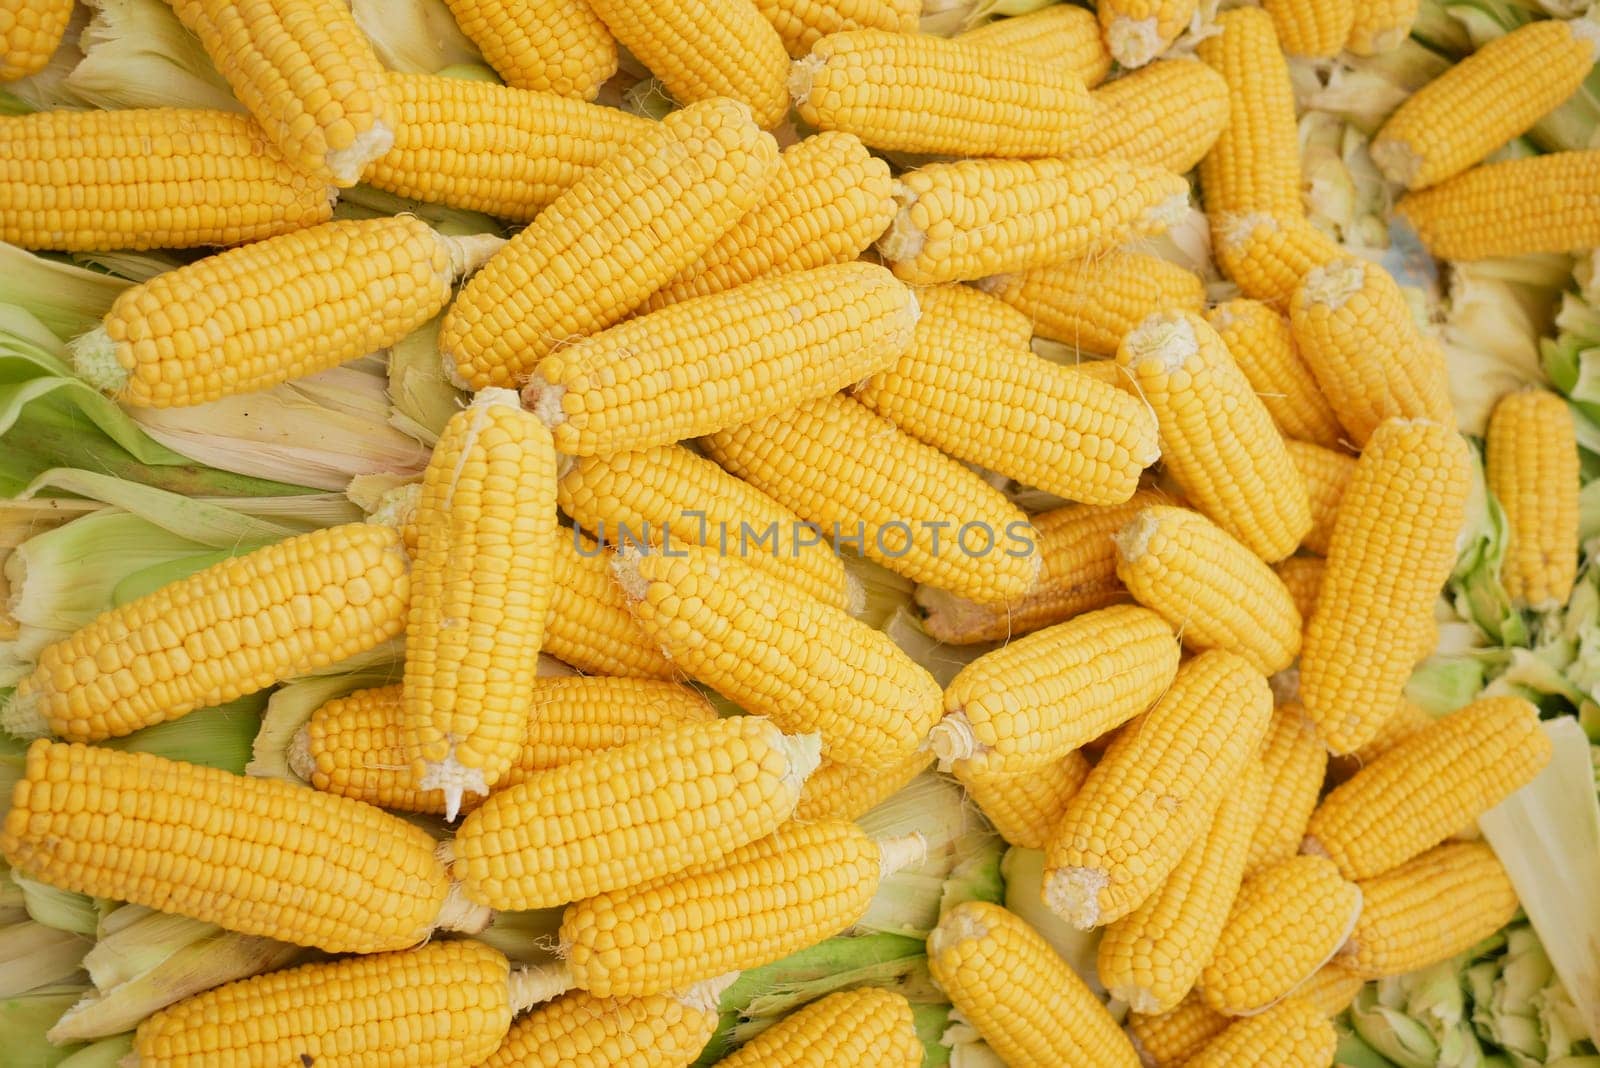 Stacked sweet corn on the cob sits on the table, a staple food in cuisine,